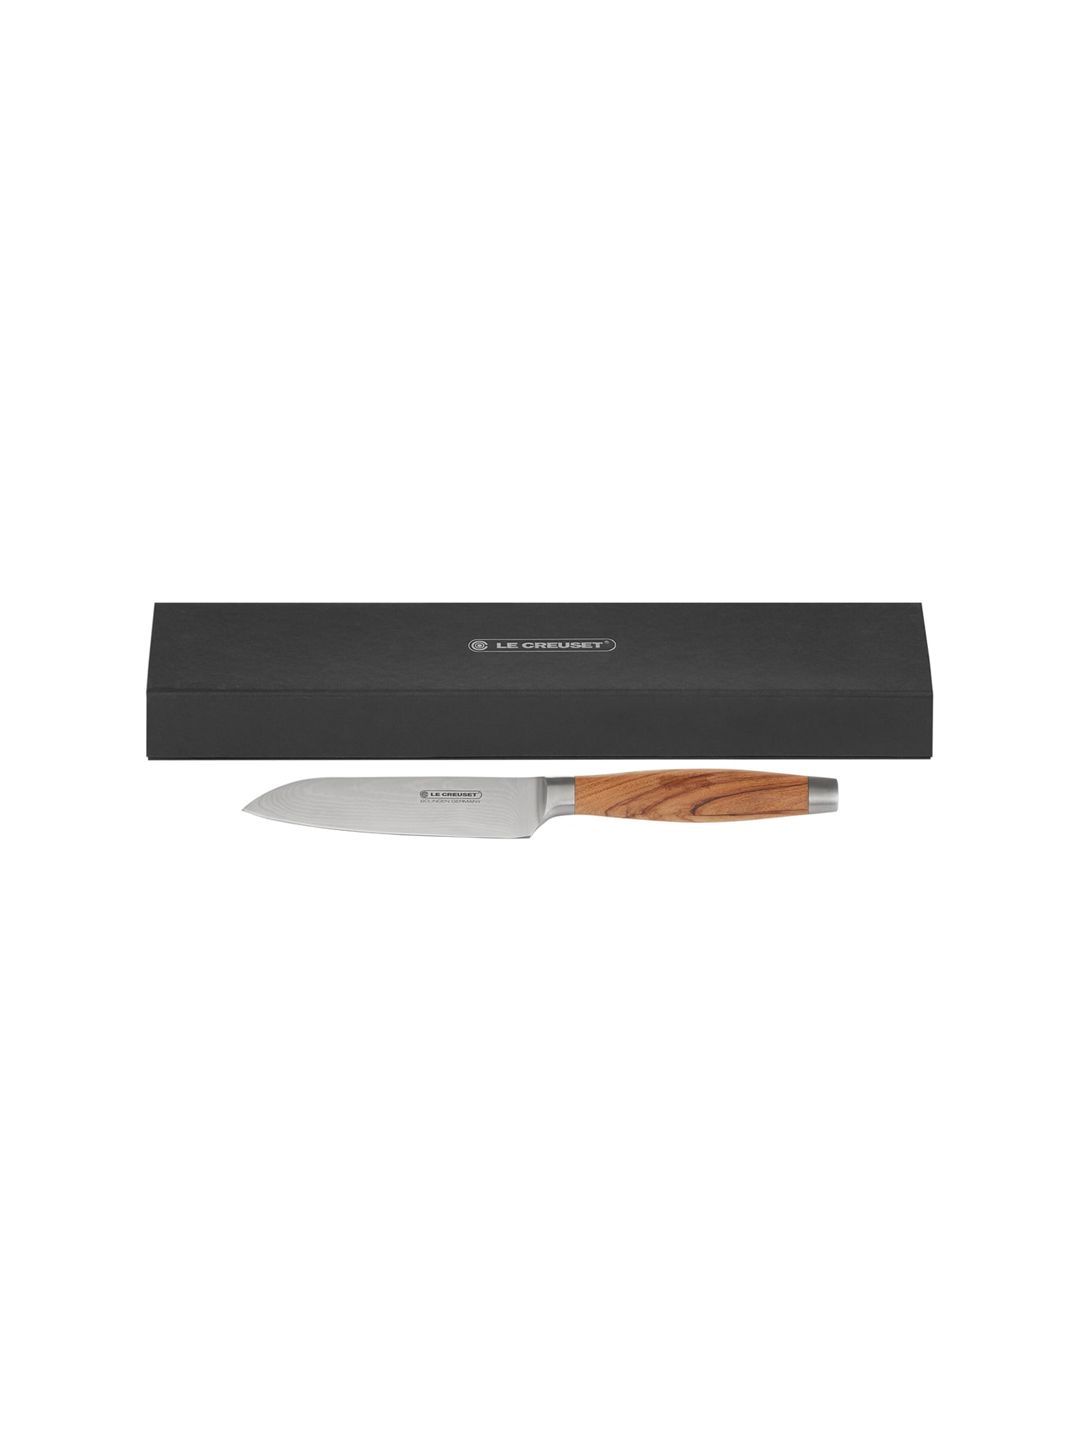 LE CREUSET Solid Stainless Steel Knife Price in India